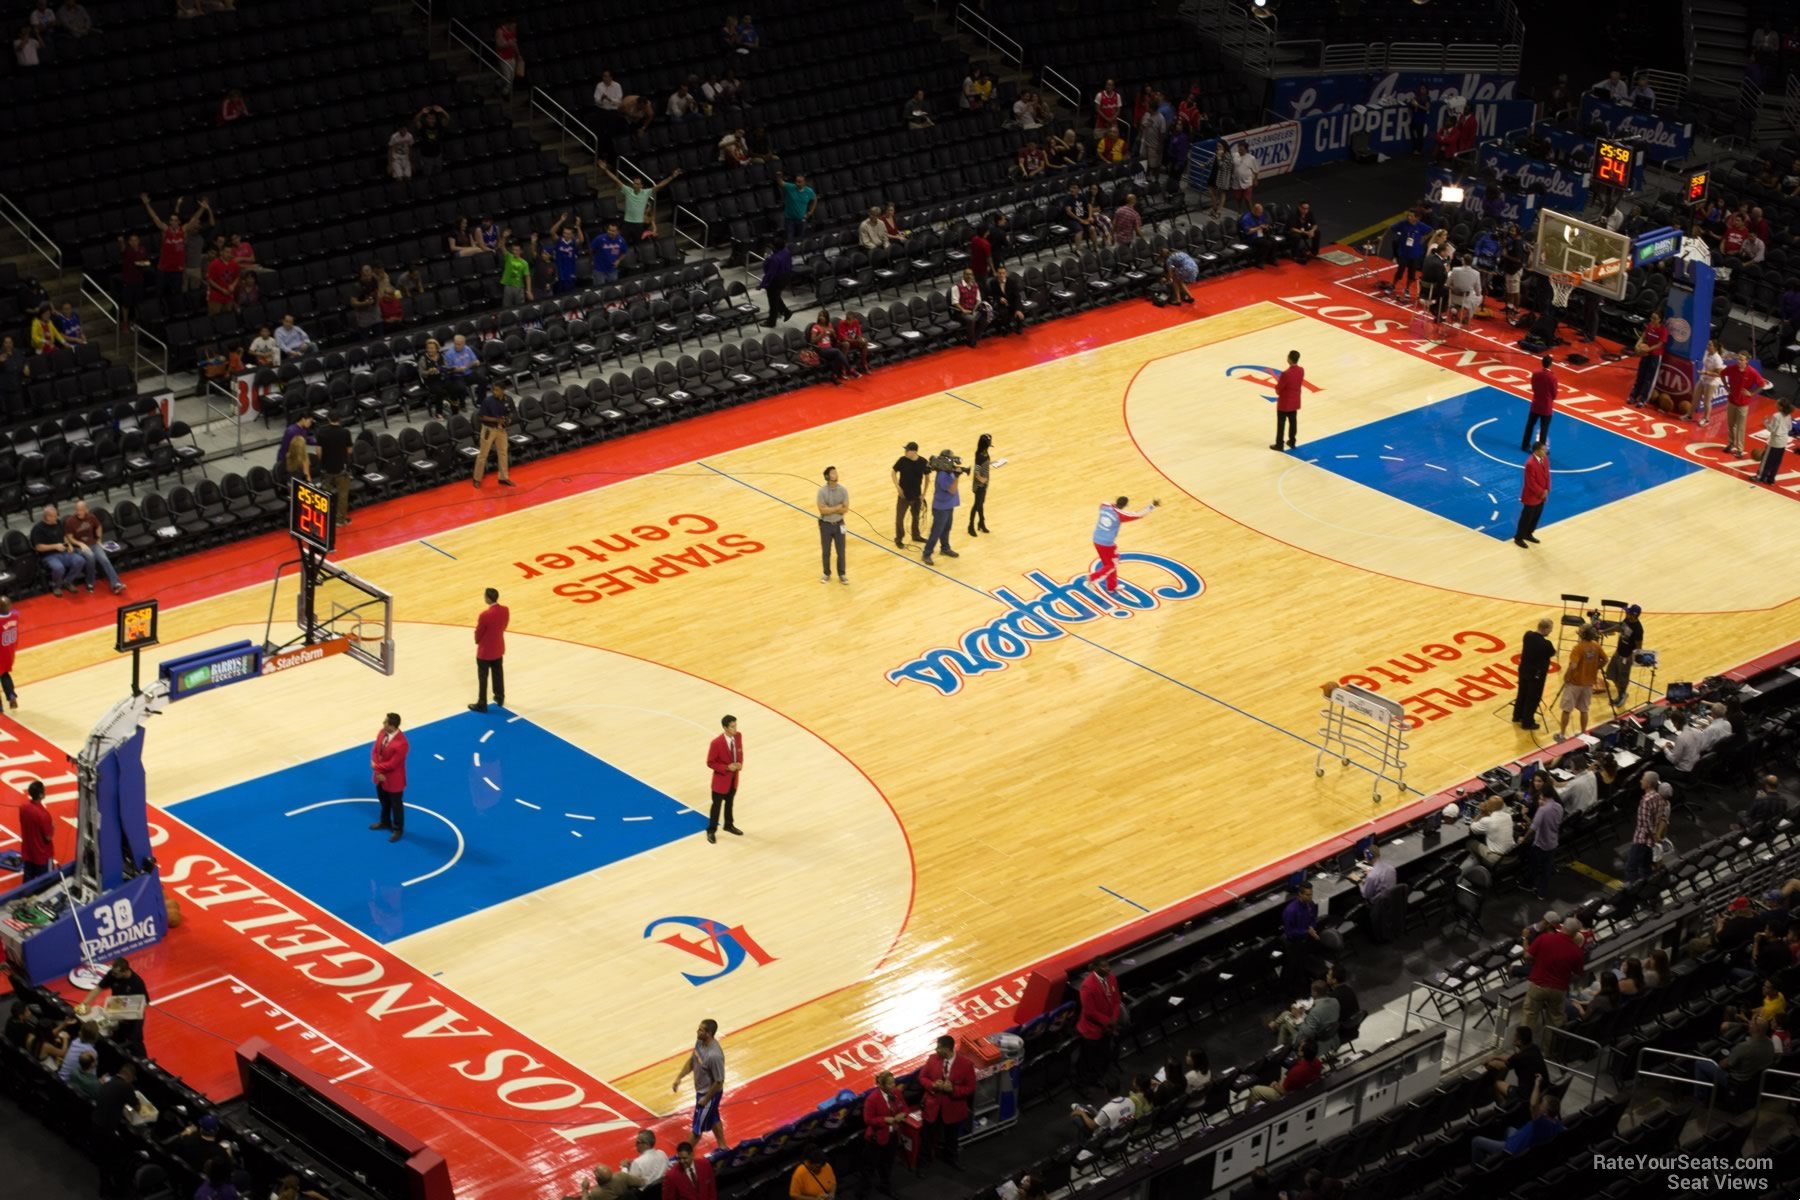 Staples Center Section 305 - Clippers/Lakers - RateYourSeats.com1800 x 1200